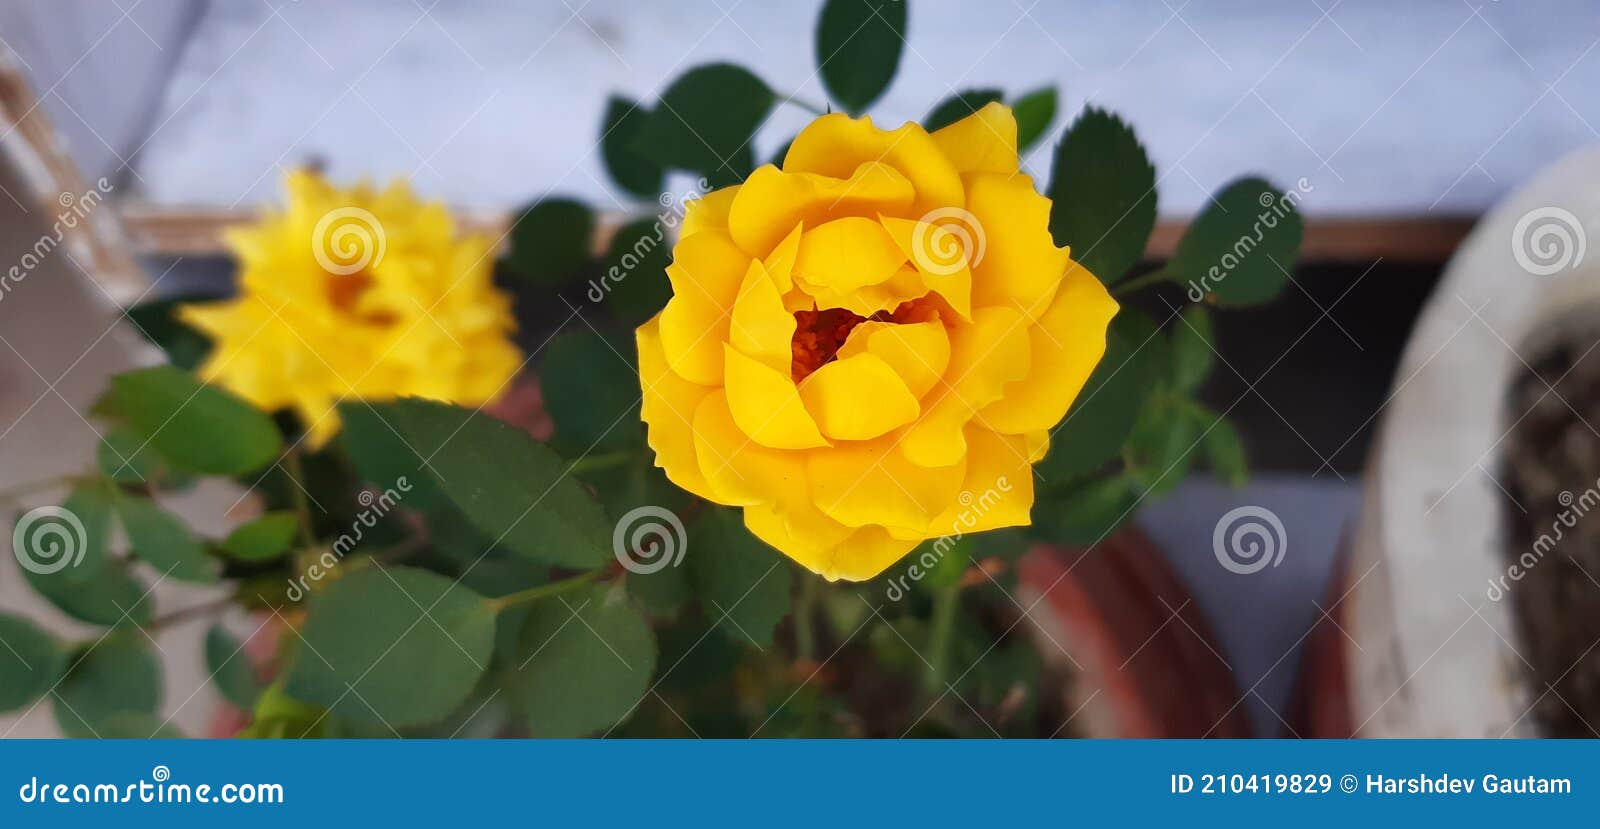 Miniature Yellow Rose Flower Stock Image - Image of verity, flower ...